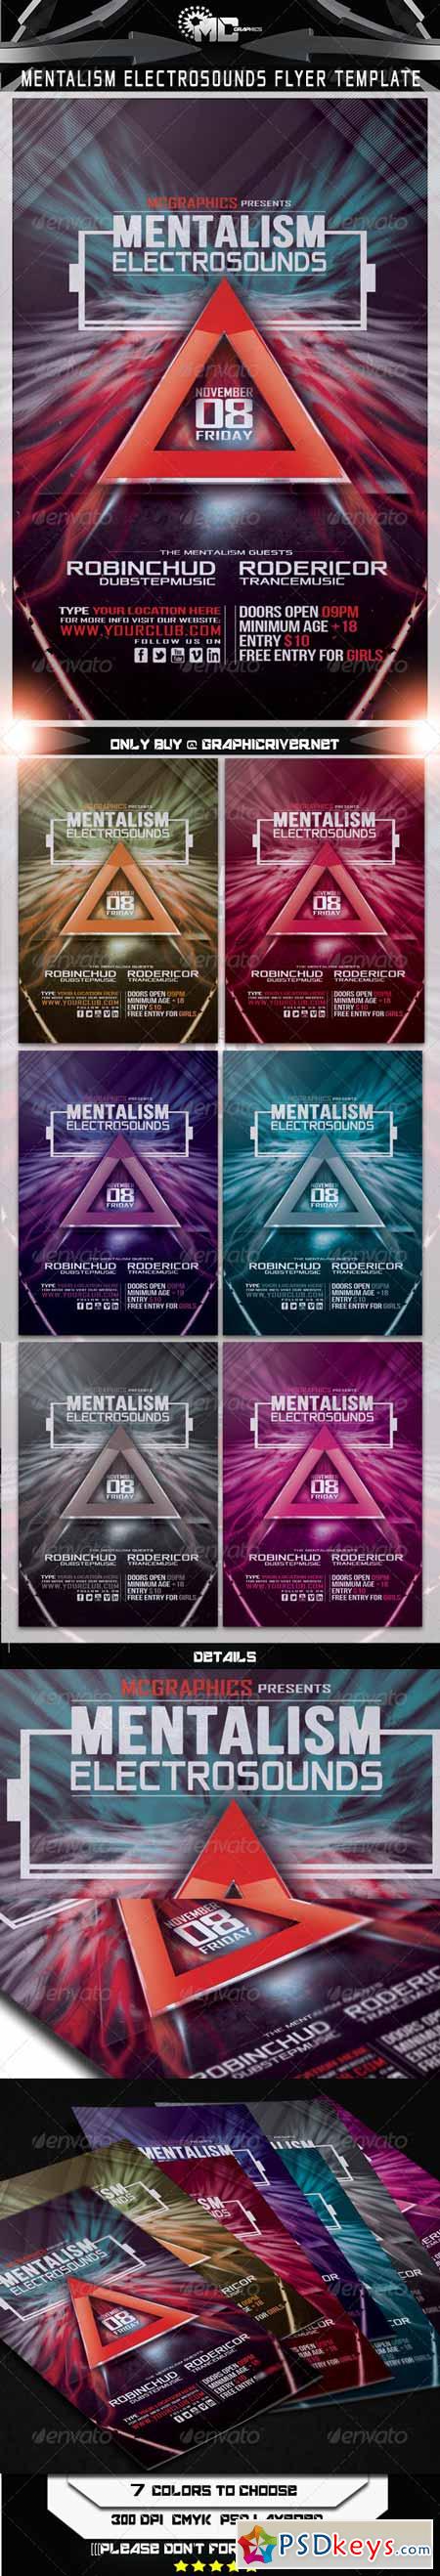 Mentalism Electro Sounds Flyer Template 5684881